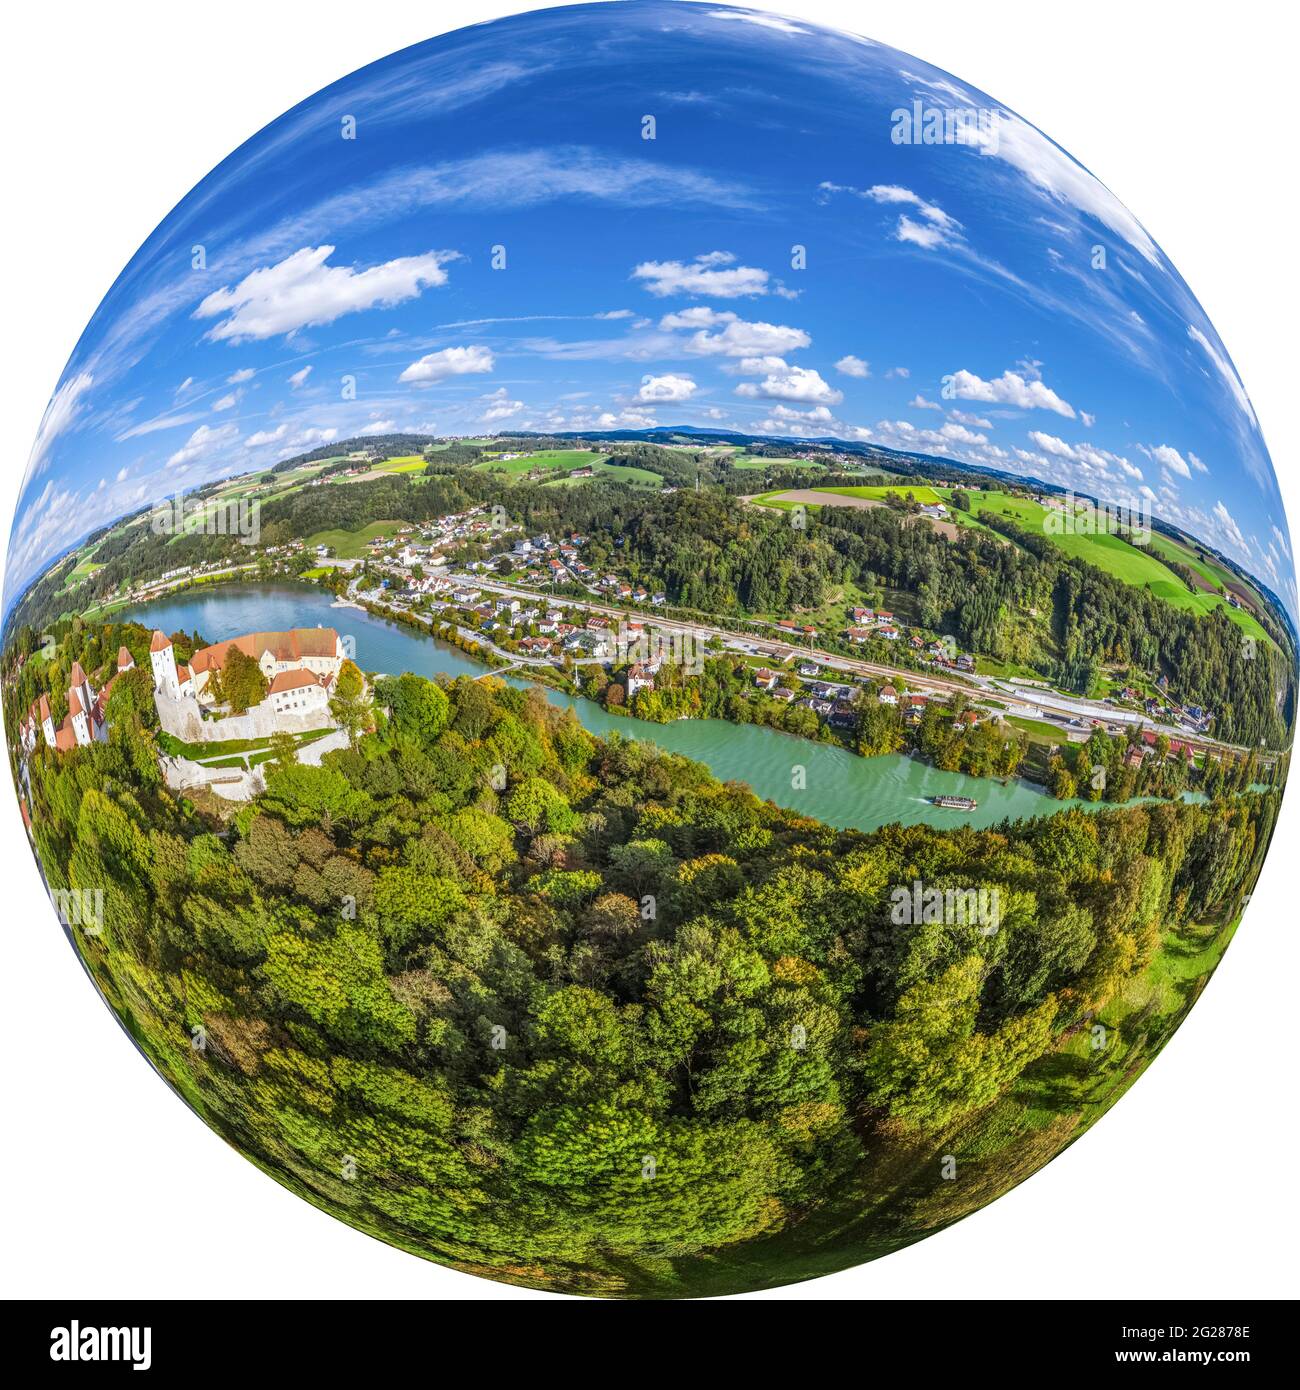 View of Neuburg am Inn Castle in the Donau-Wald region in the district of Passau, on the border with (Upper) Austria. Stock Photo